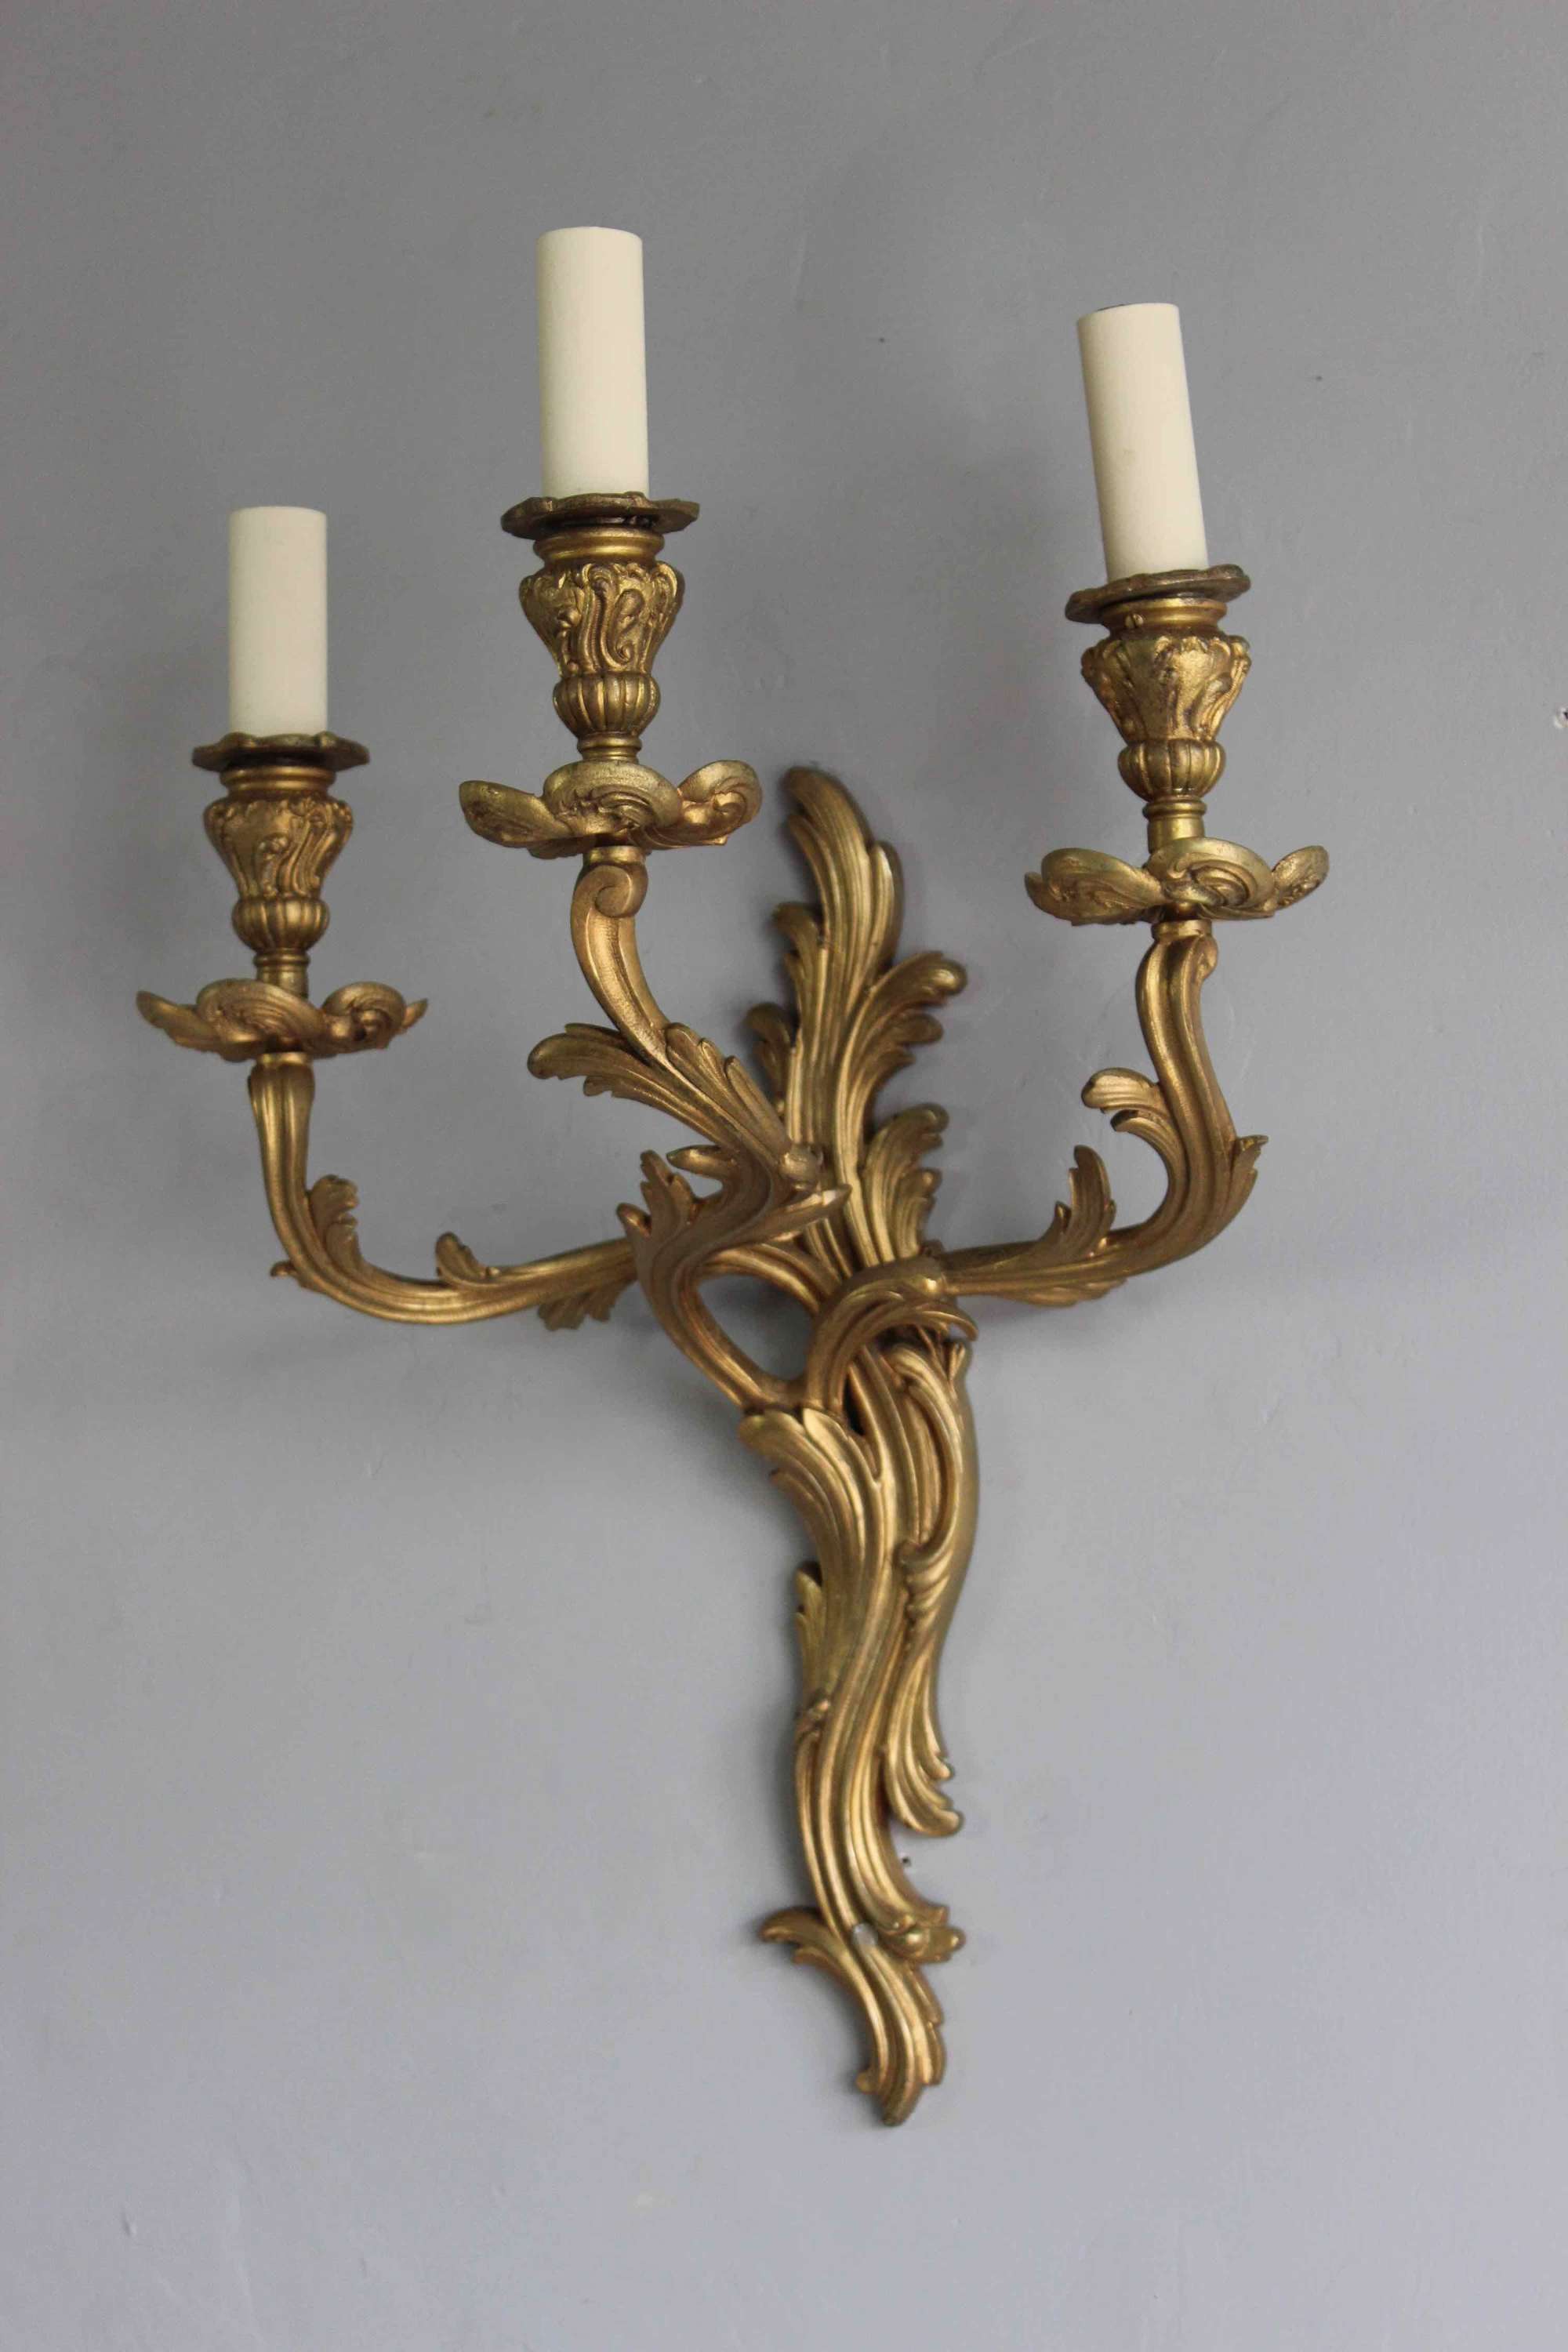 Single three branch naturalistic sconce